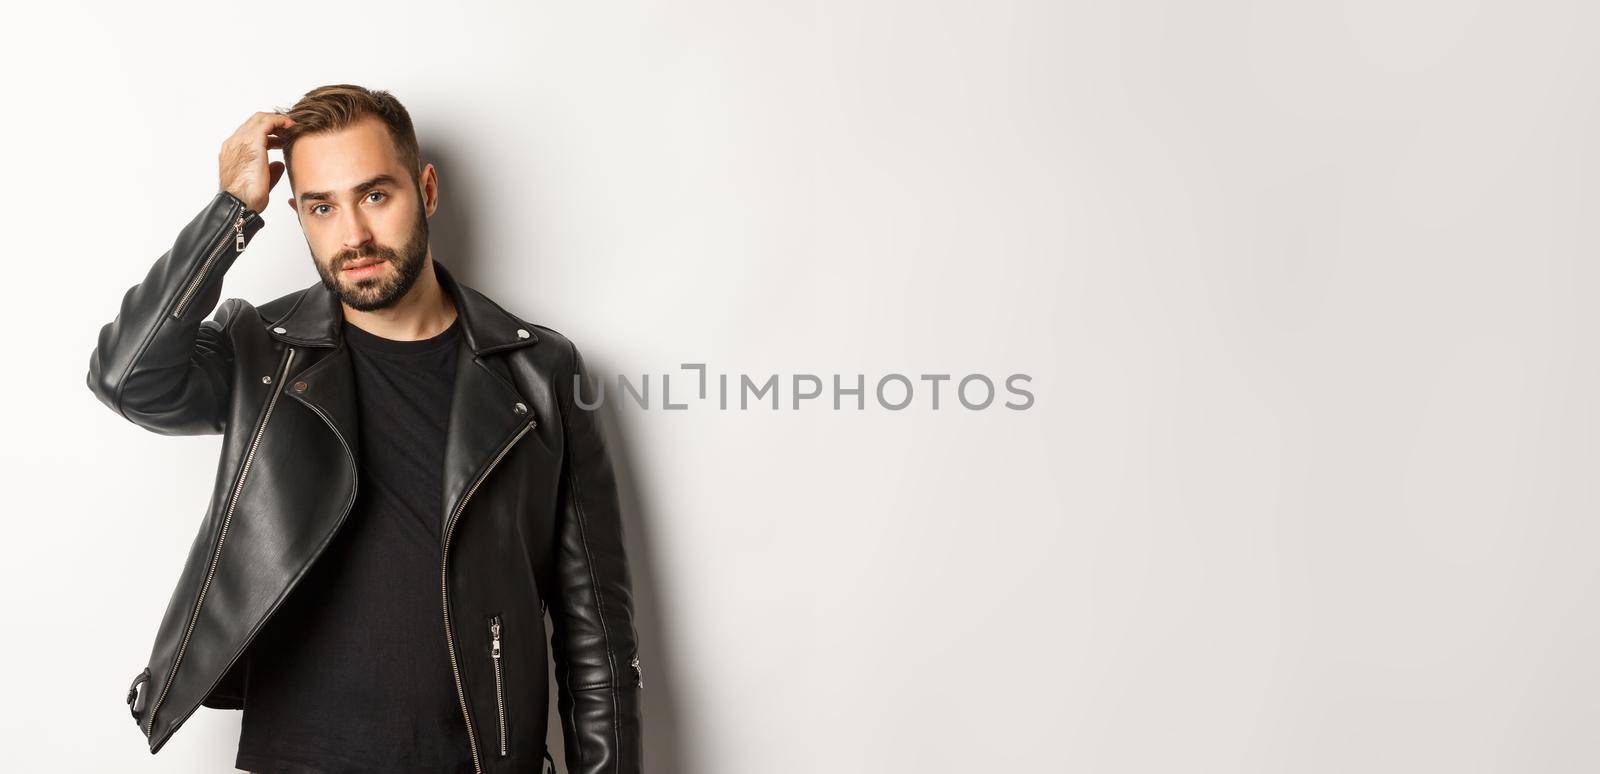 Handsome macho man in black biker jacket, touching his haircut and looking cool, white background.